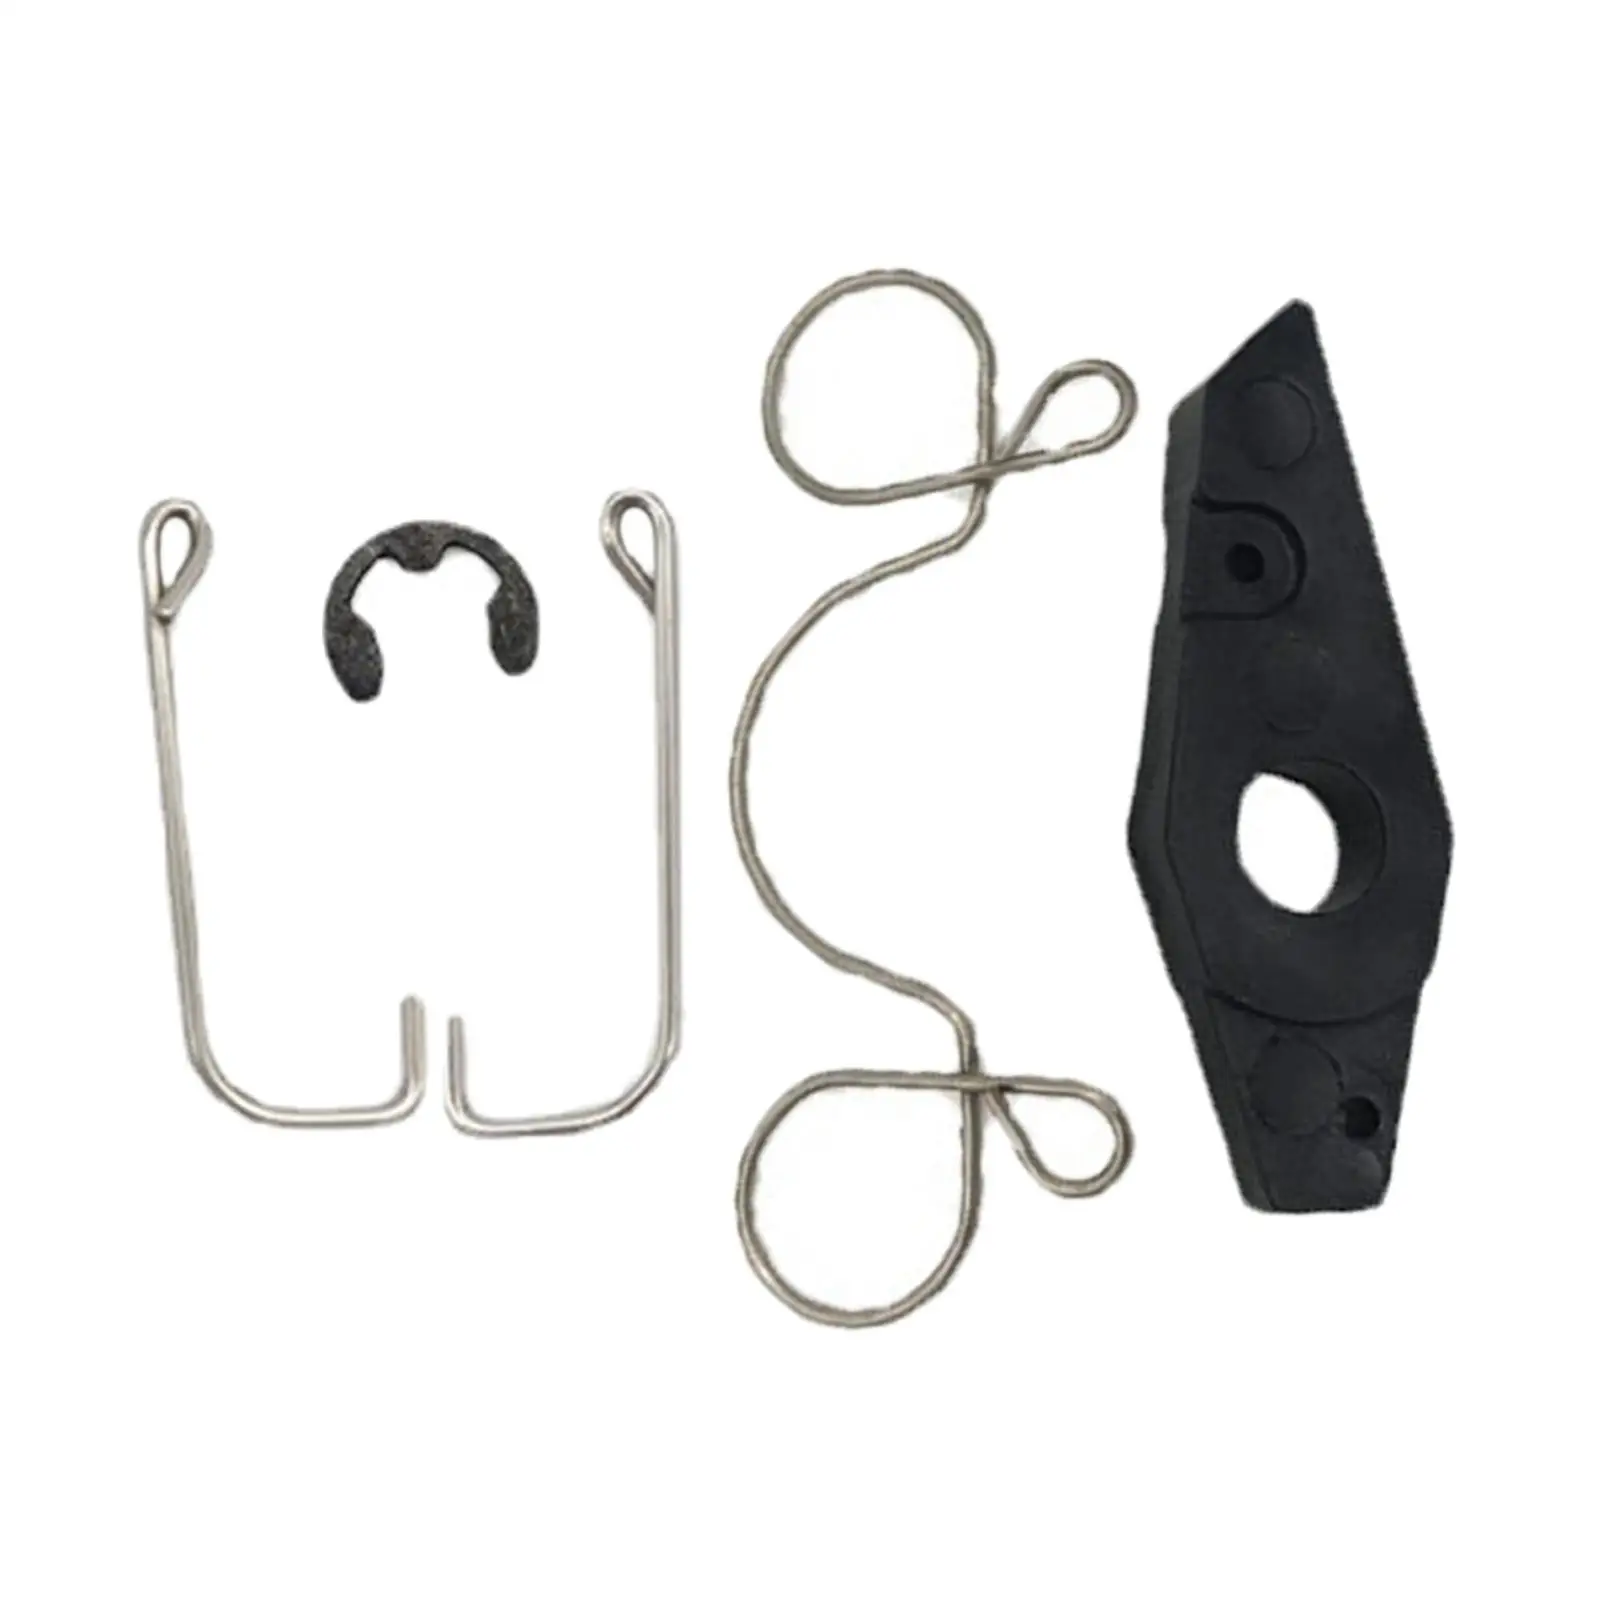 Starter Parts Premium Easy to Install Replaces Accessory Pull Start Repair Tools